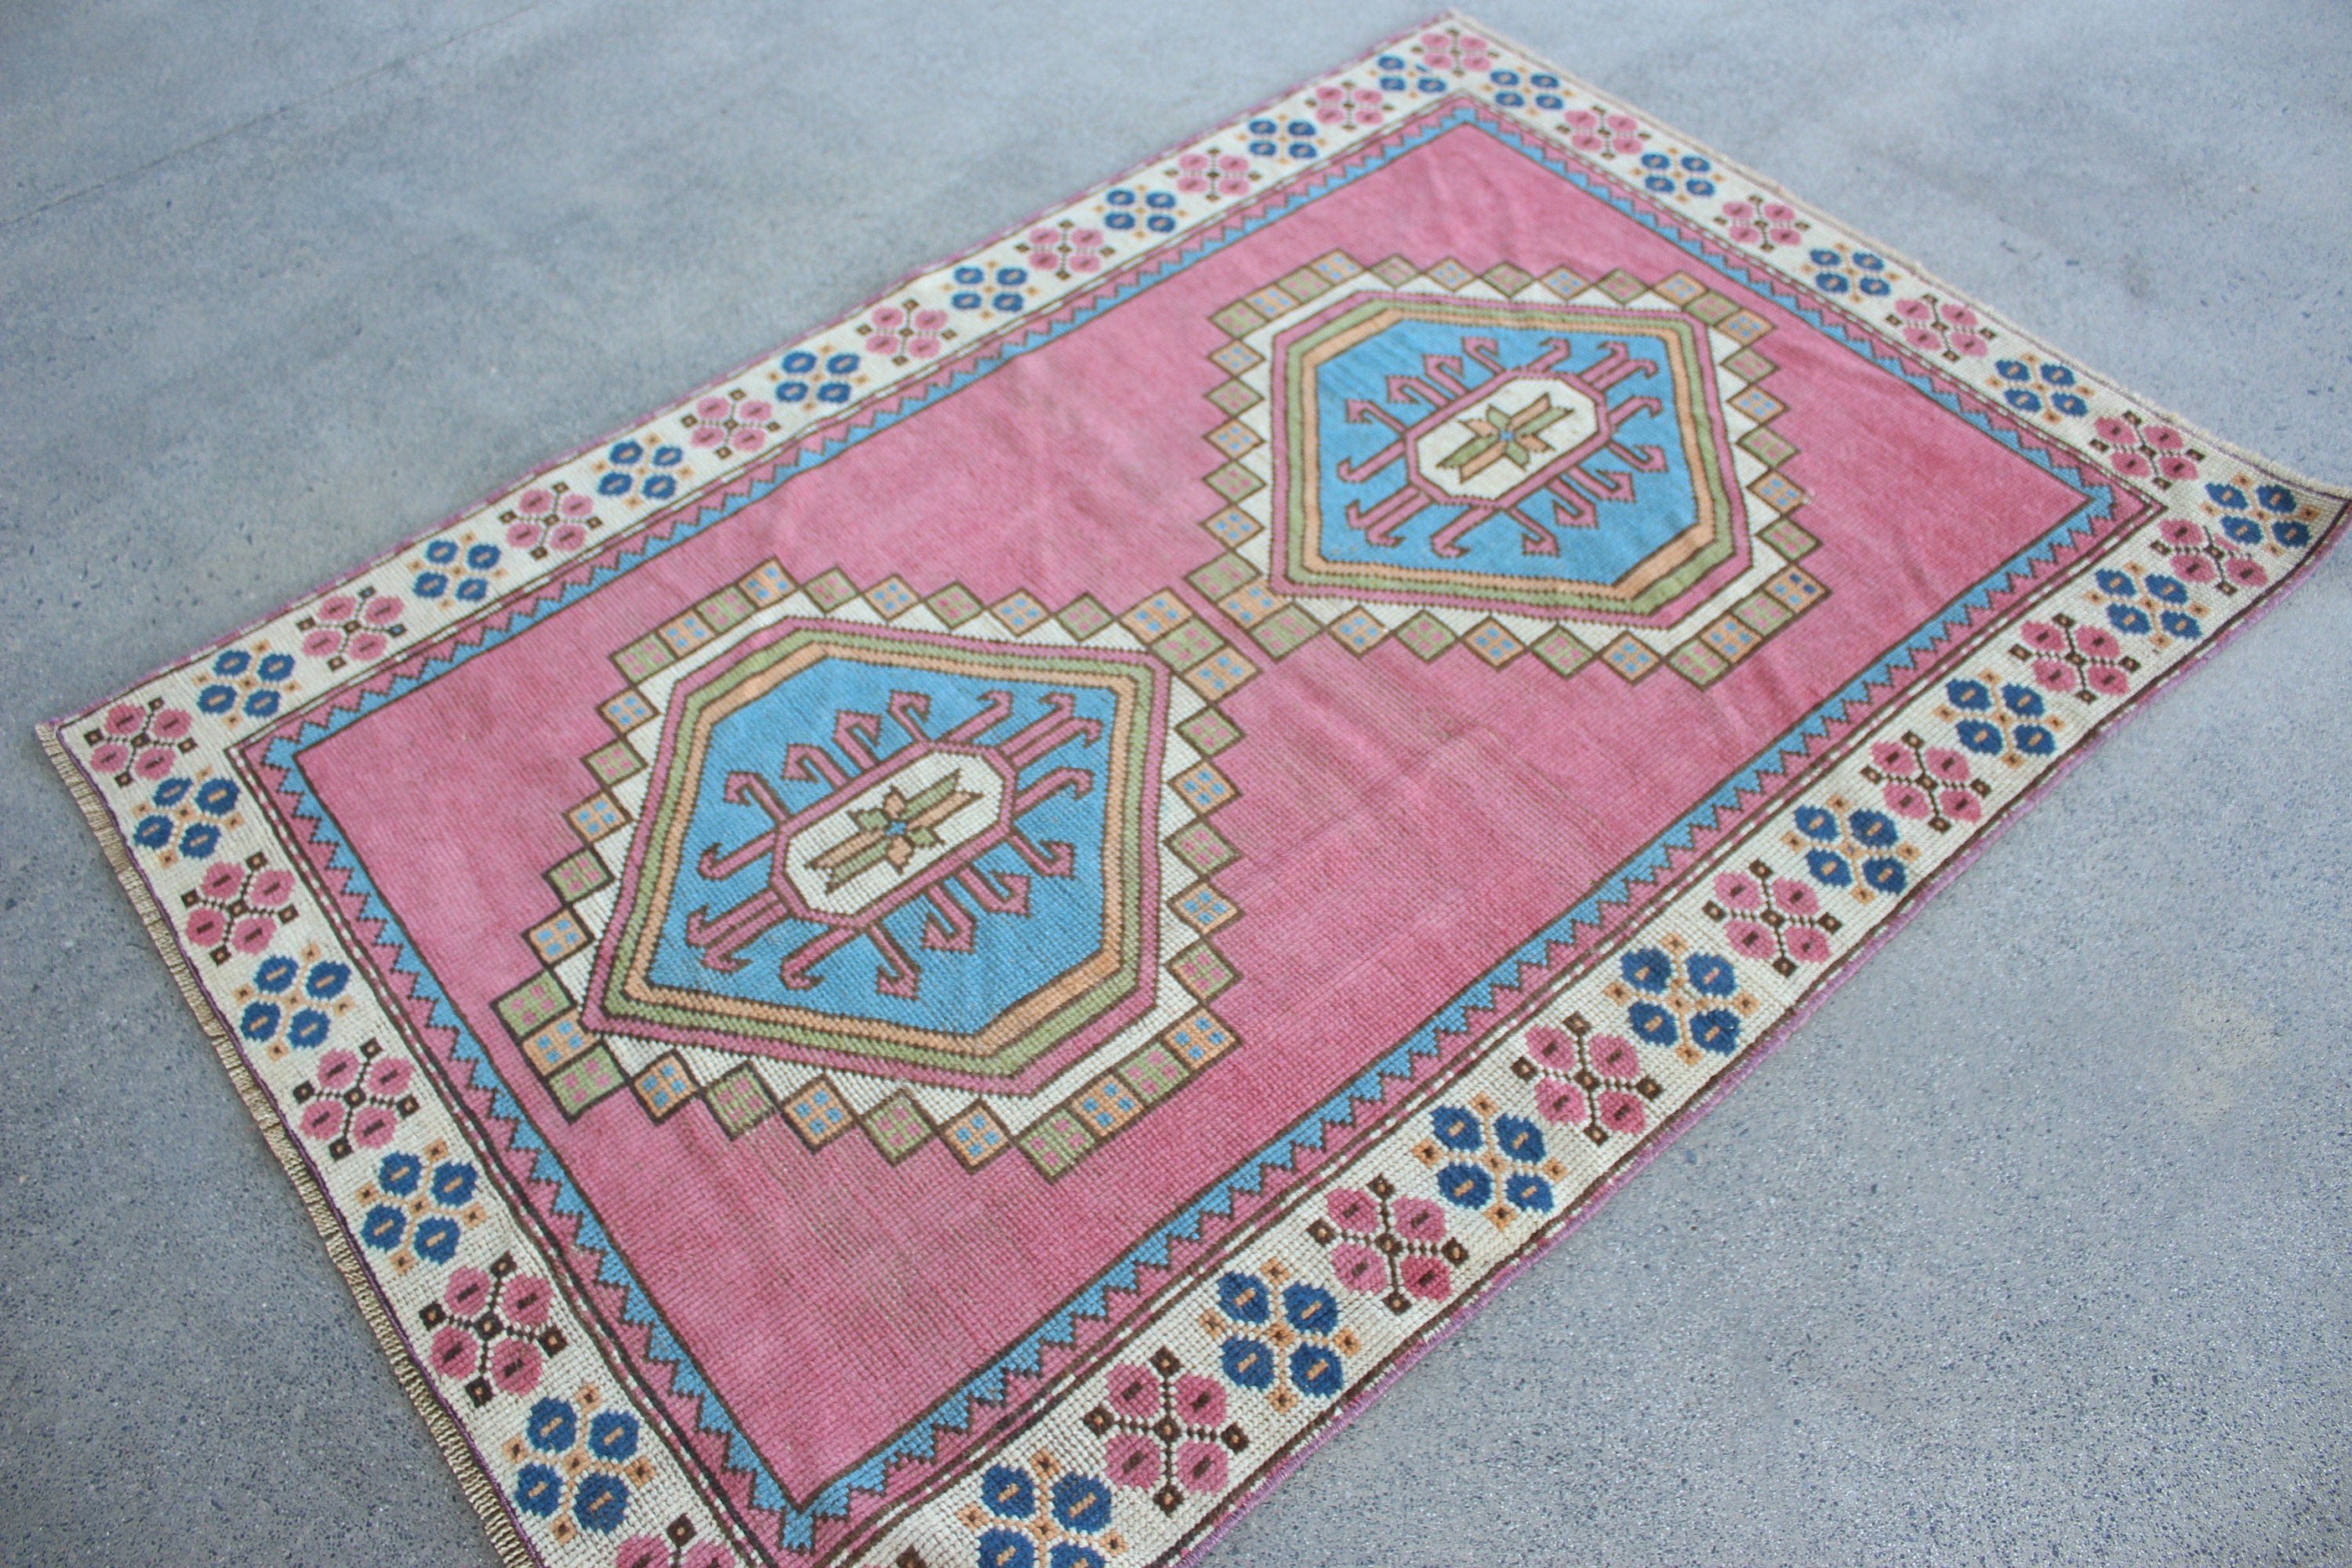 Cool Rug, Antique Rugs, 4x5.7 ft Accent Rugs, Turkish Rugs, Rugs for Nursery, Kitchen Rugs, Pink Oushak Rug, Entry Rugs, Vintage Rug